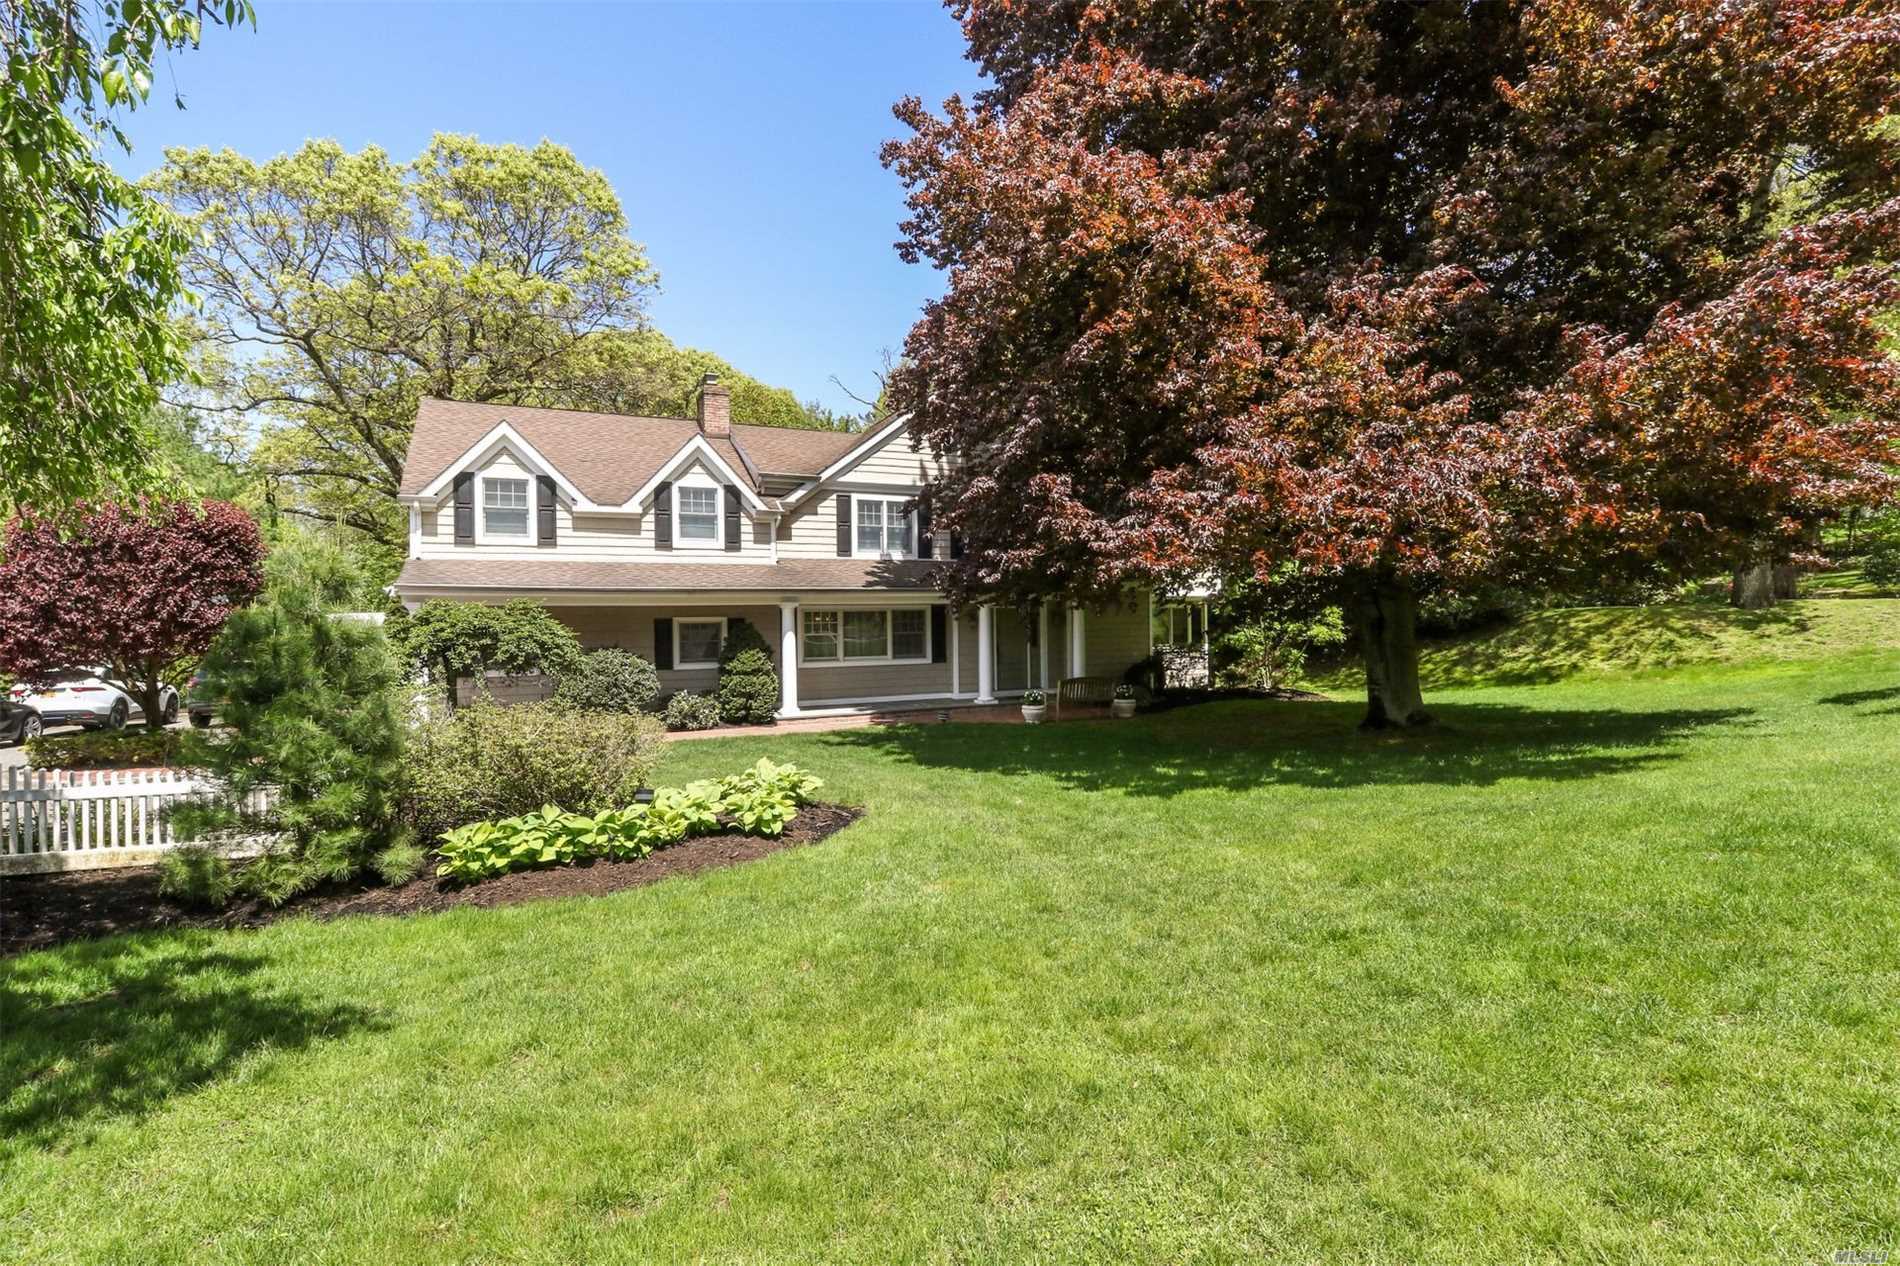 GORGEOUS home in The Gates of Woodbury. This exquisite 7 bedrm colonial is custom built & renovated to perfection. The gourmet Chef&rsquo;s kitchen has every amenity & opens to the XL Dining Rm w/fpl, Den w/fpl, Library w/bar & Living Rm. Entire house is GAS. The 2nd floor has a large Mster Ste w/fpl, balcony, luxury spa bath w/radiant ht + 2 HUGE WIC, in addition to 4 other bedrms & 3 baths + laundry (2 Ensuites). IG pool, paver patio & full house generator. Full bsmt - Syosset SD-- WW Elem/HBT.